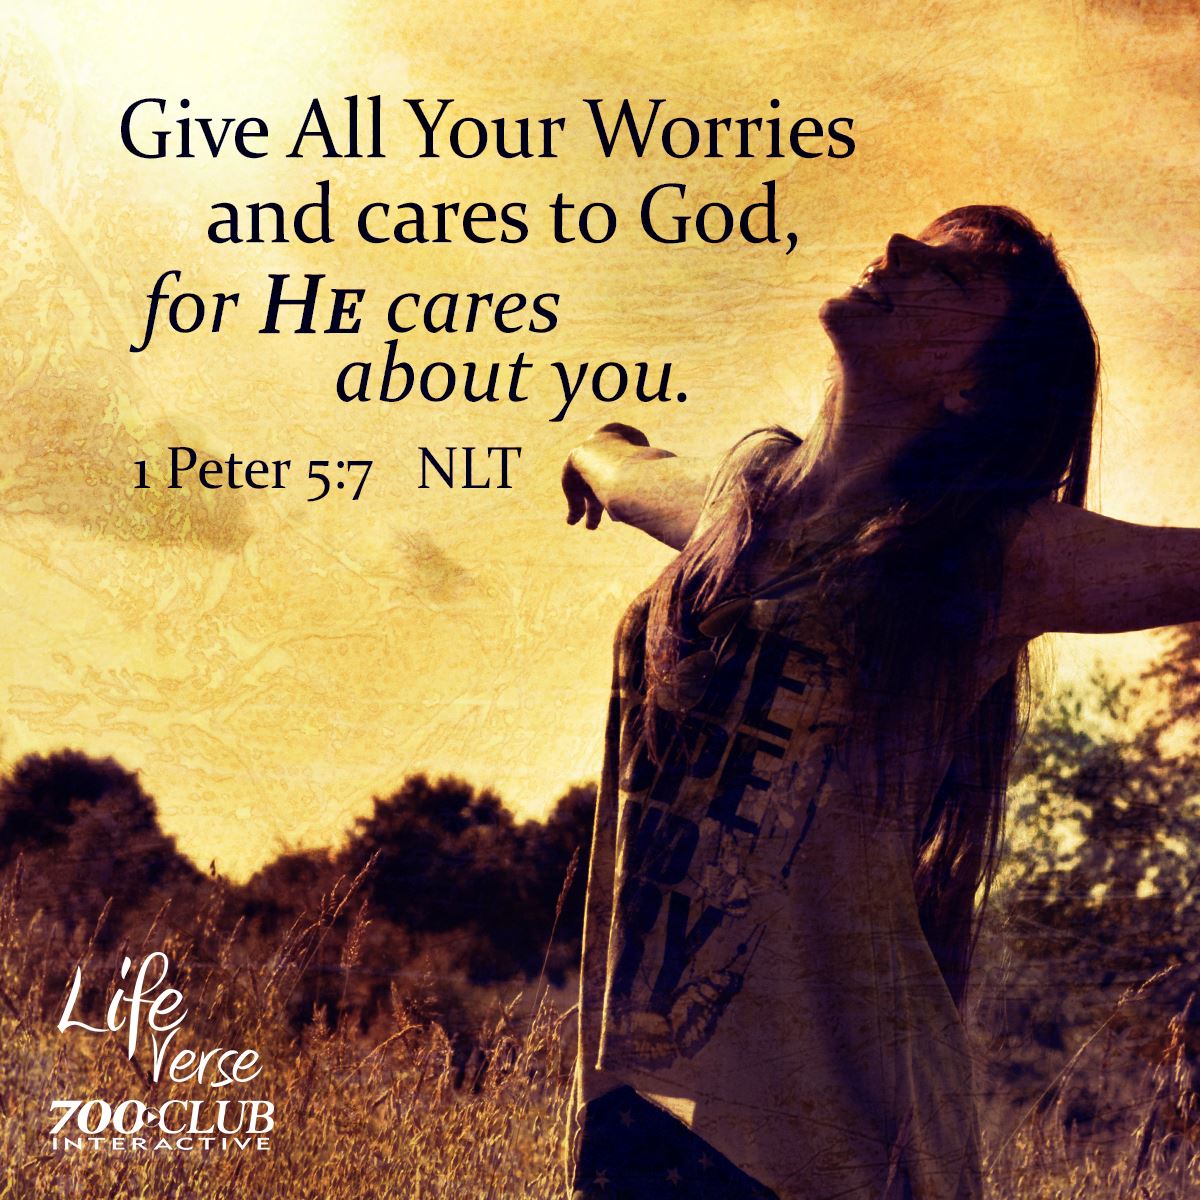 Give all your worries and cares to God, for He cares about you. 1 Peter 5v17